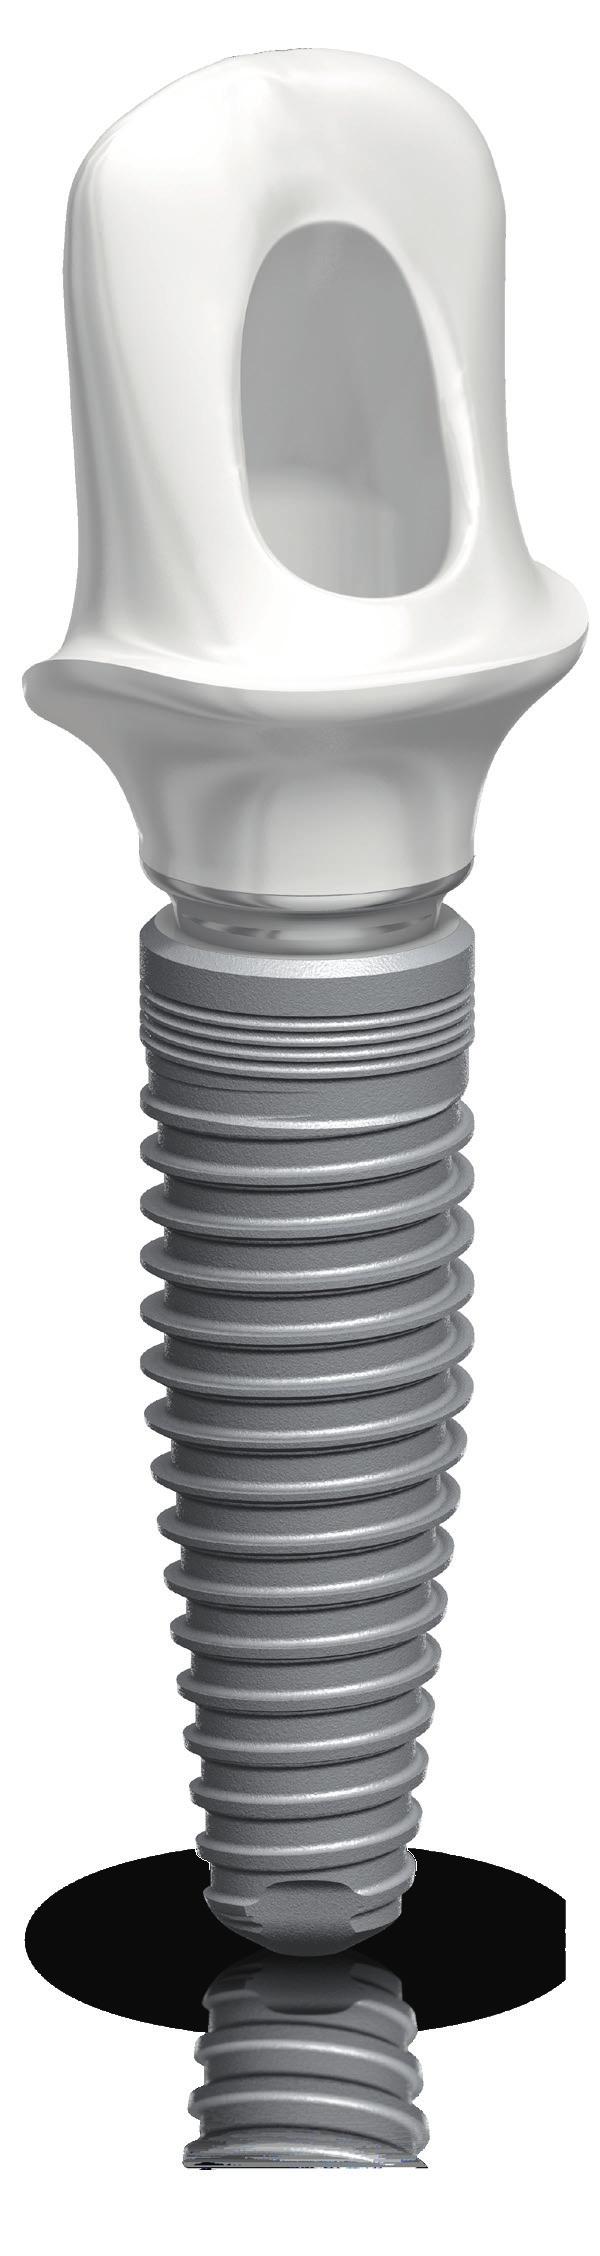 NobelReplace Conical Connection Product overview High primary stability, even in compromised